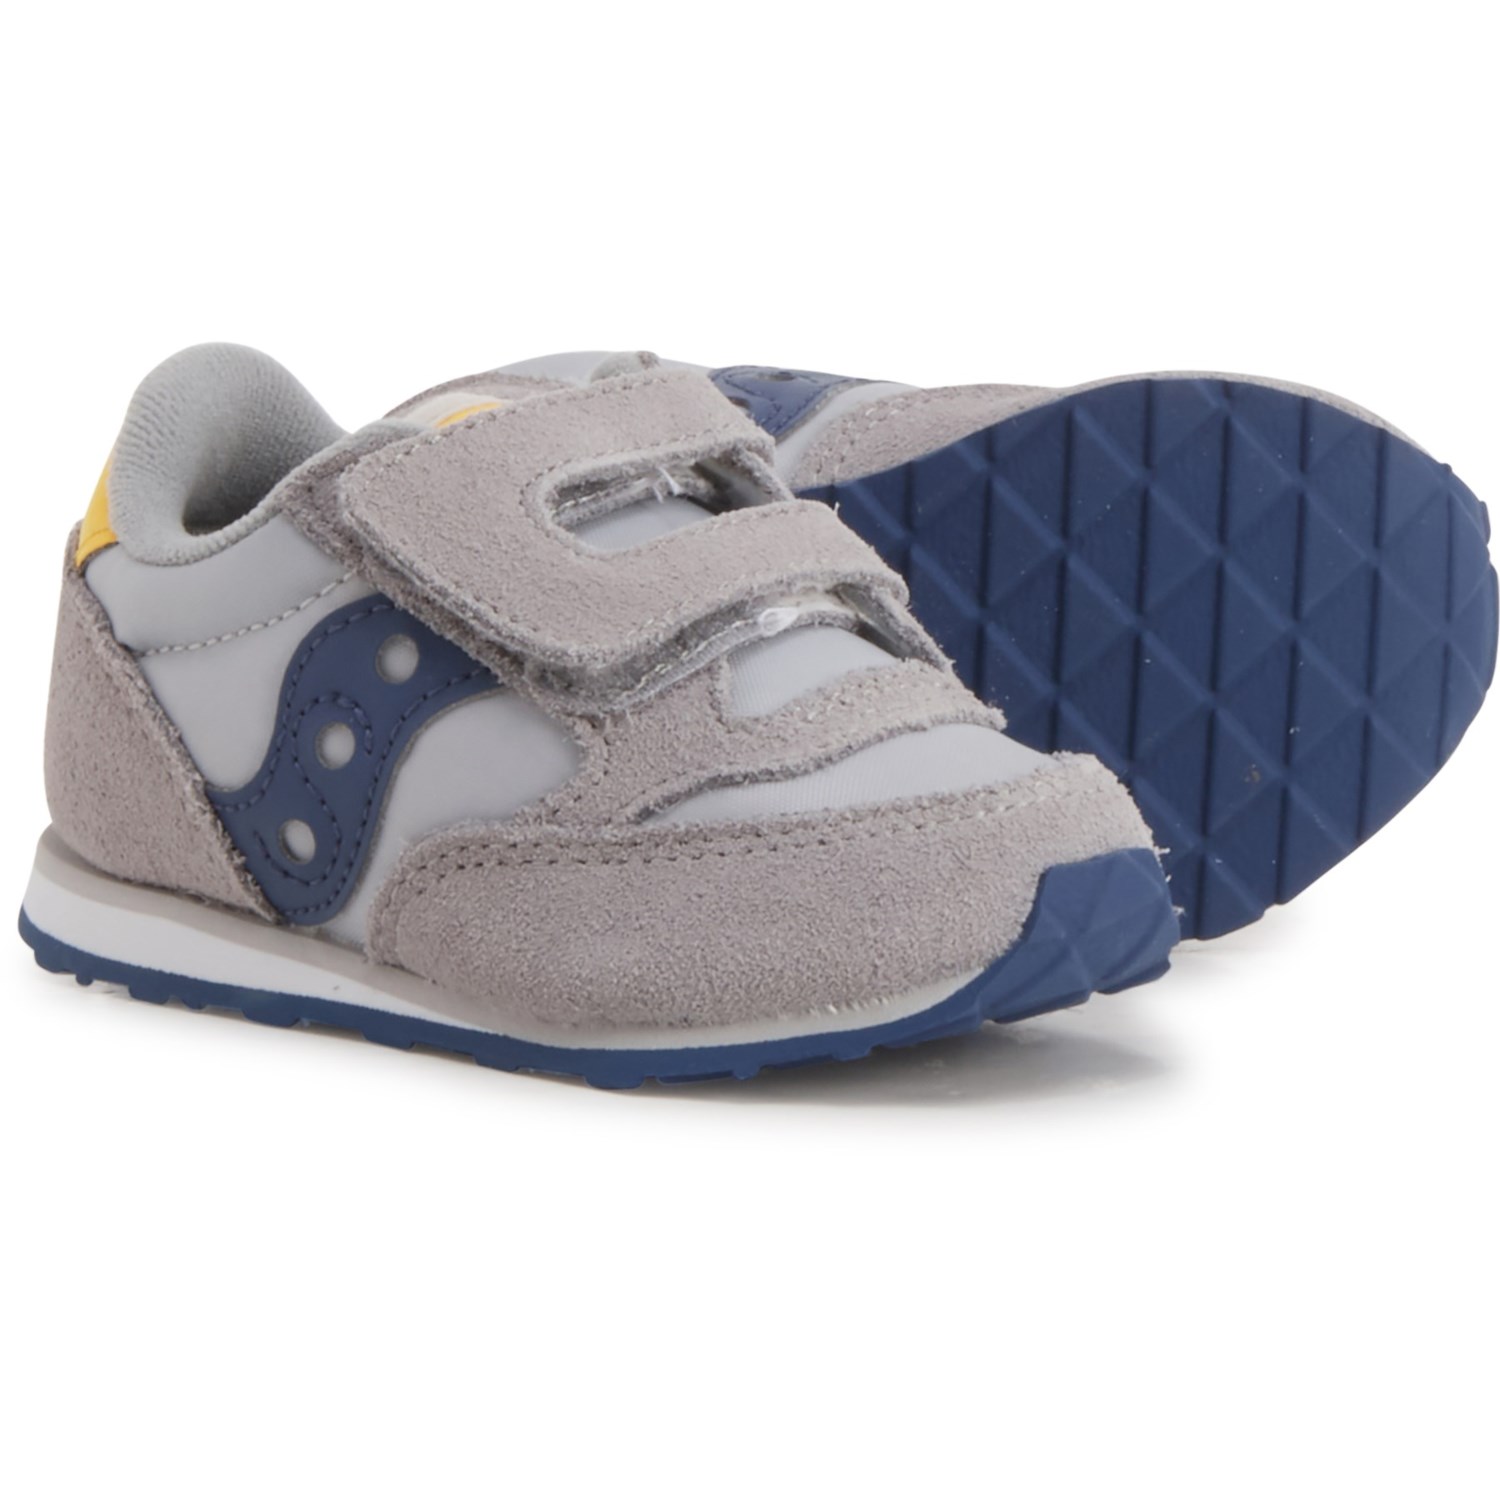 Saucony Toddler Boys Fashion Running Shoes - Leather